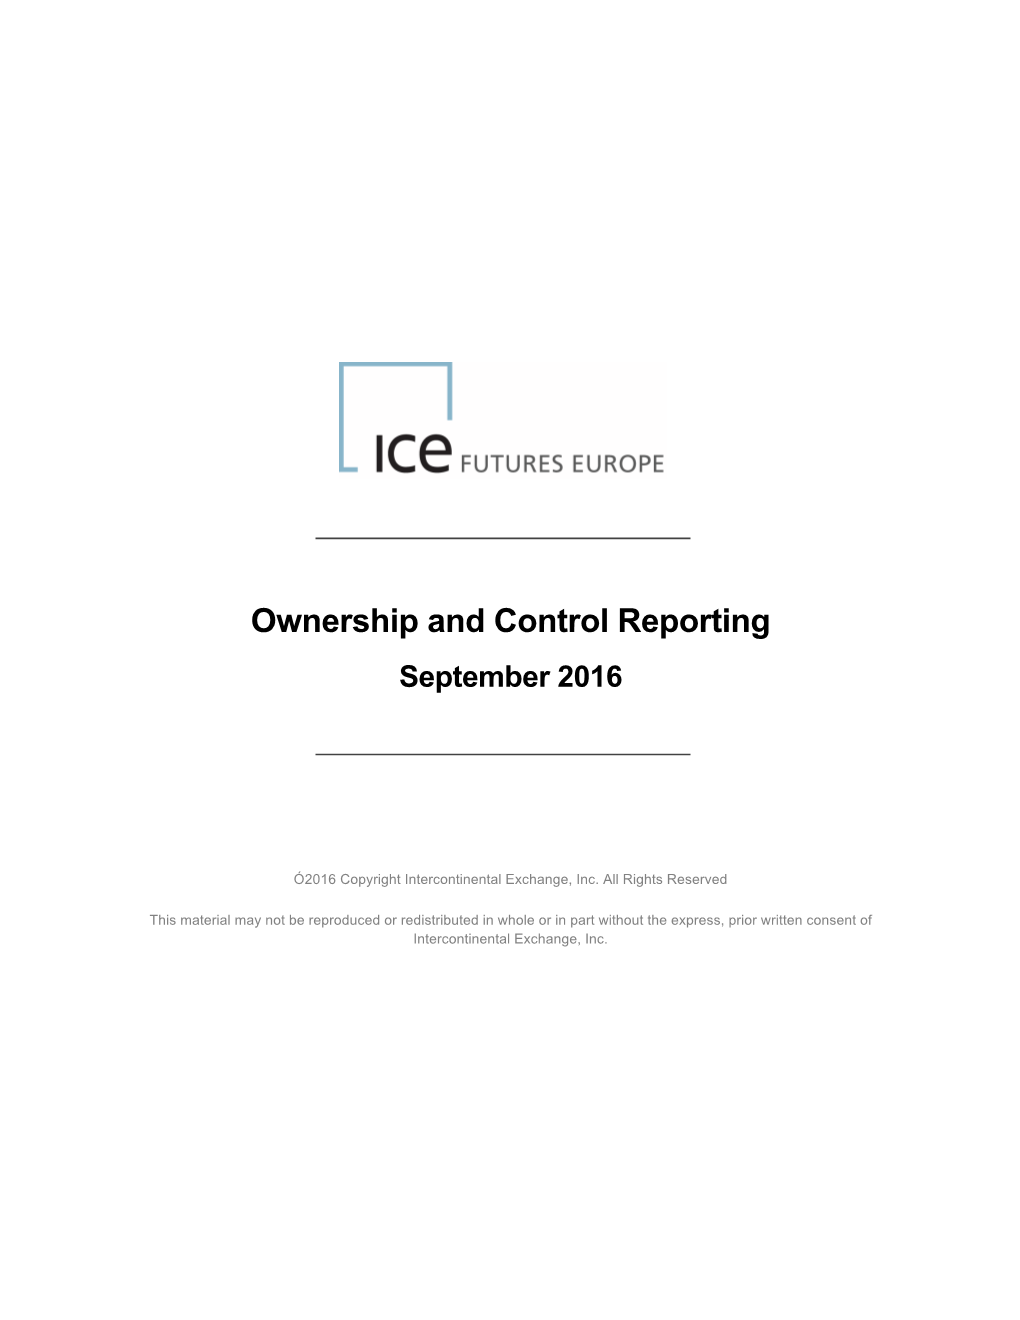 Ownership and Control Reporting September 2016